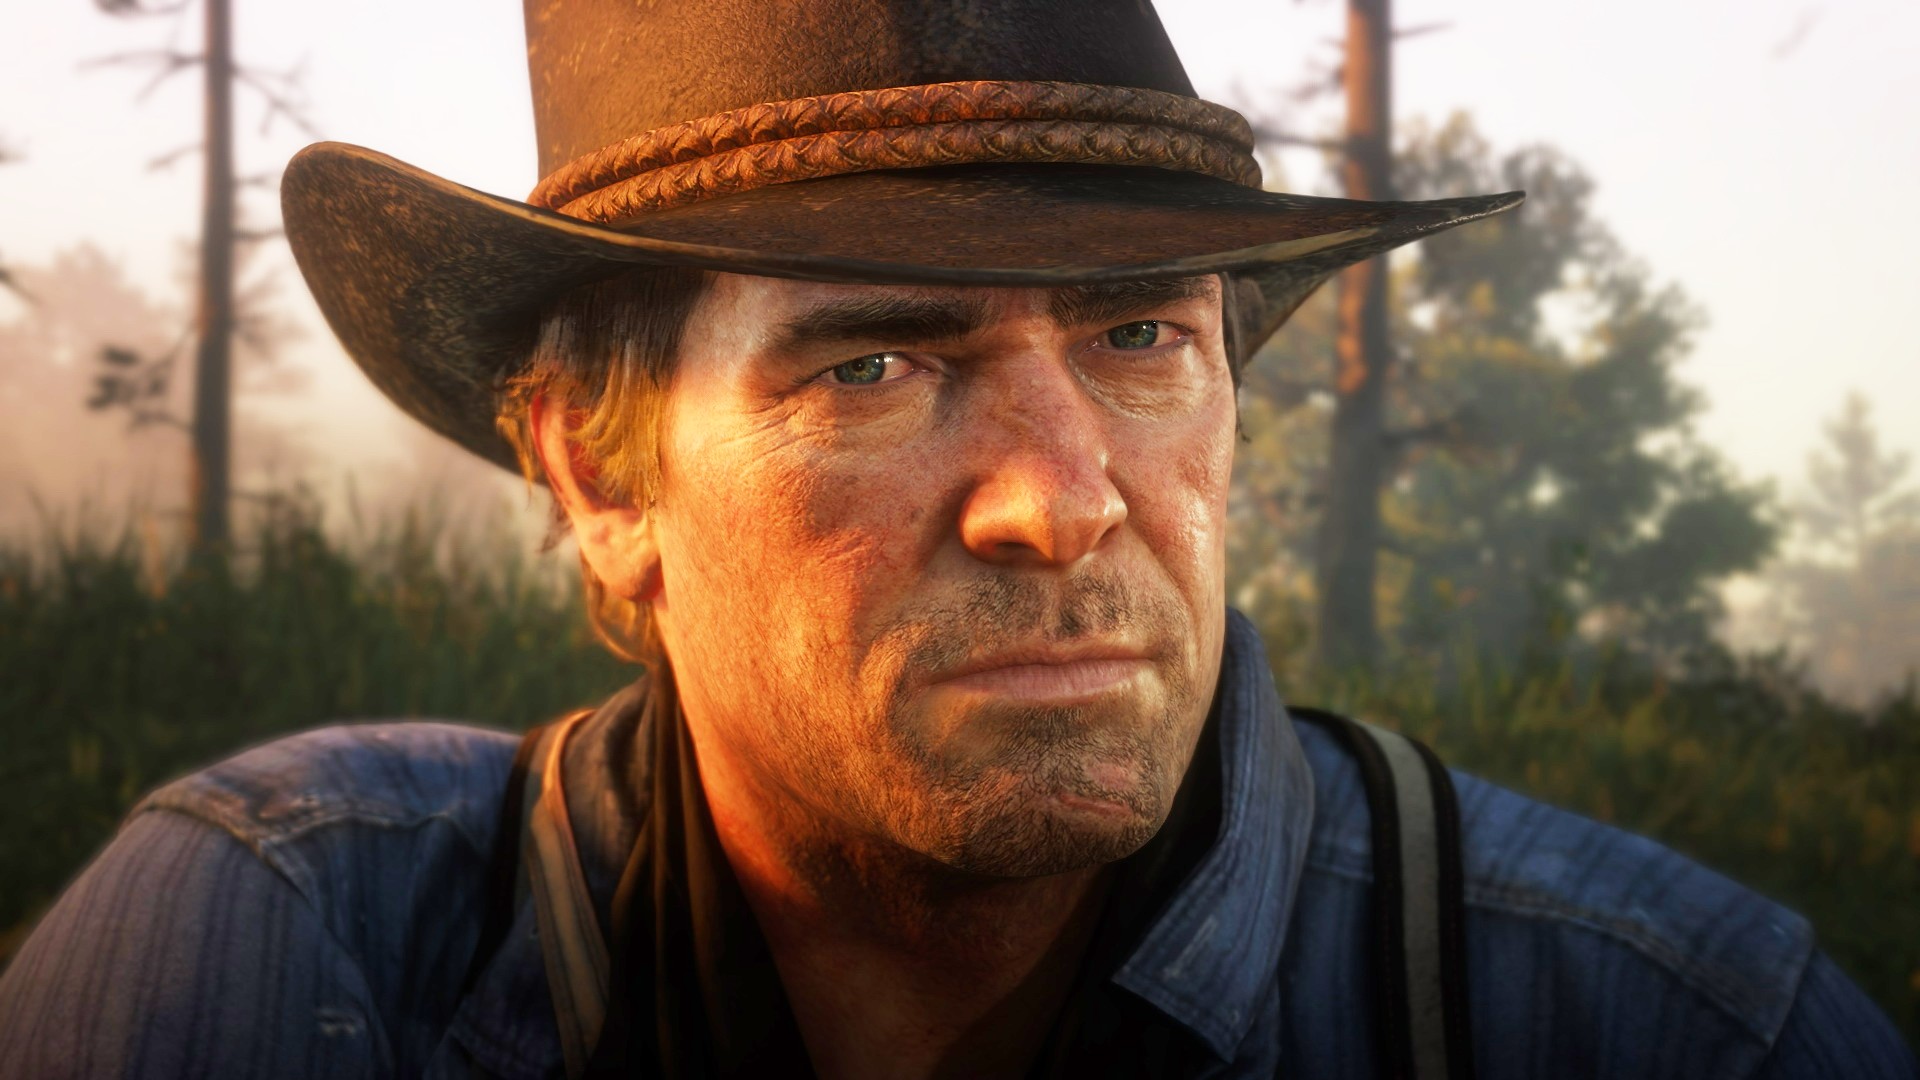 Red Dead Redemption 2 leaps up Steam charts, but Rockstar seems done